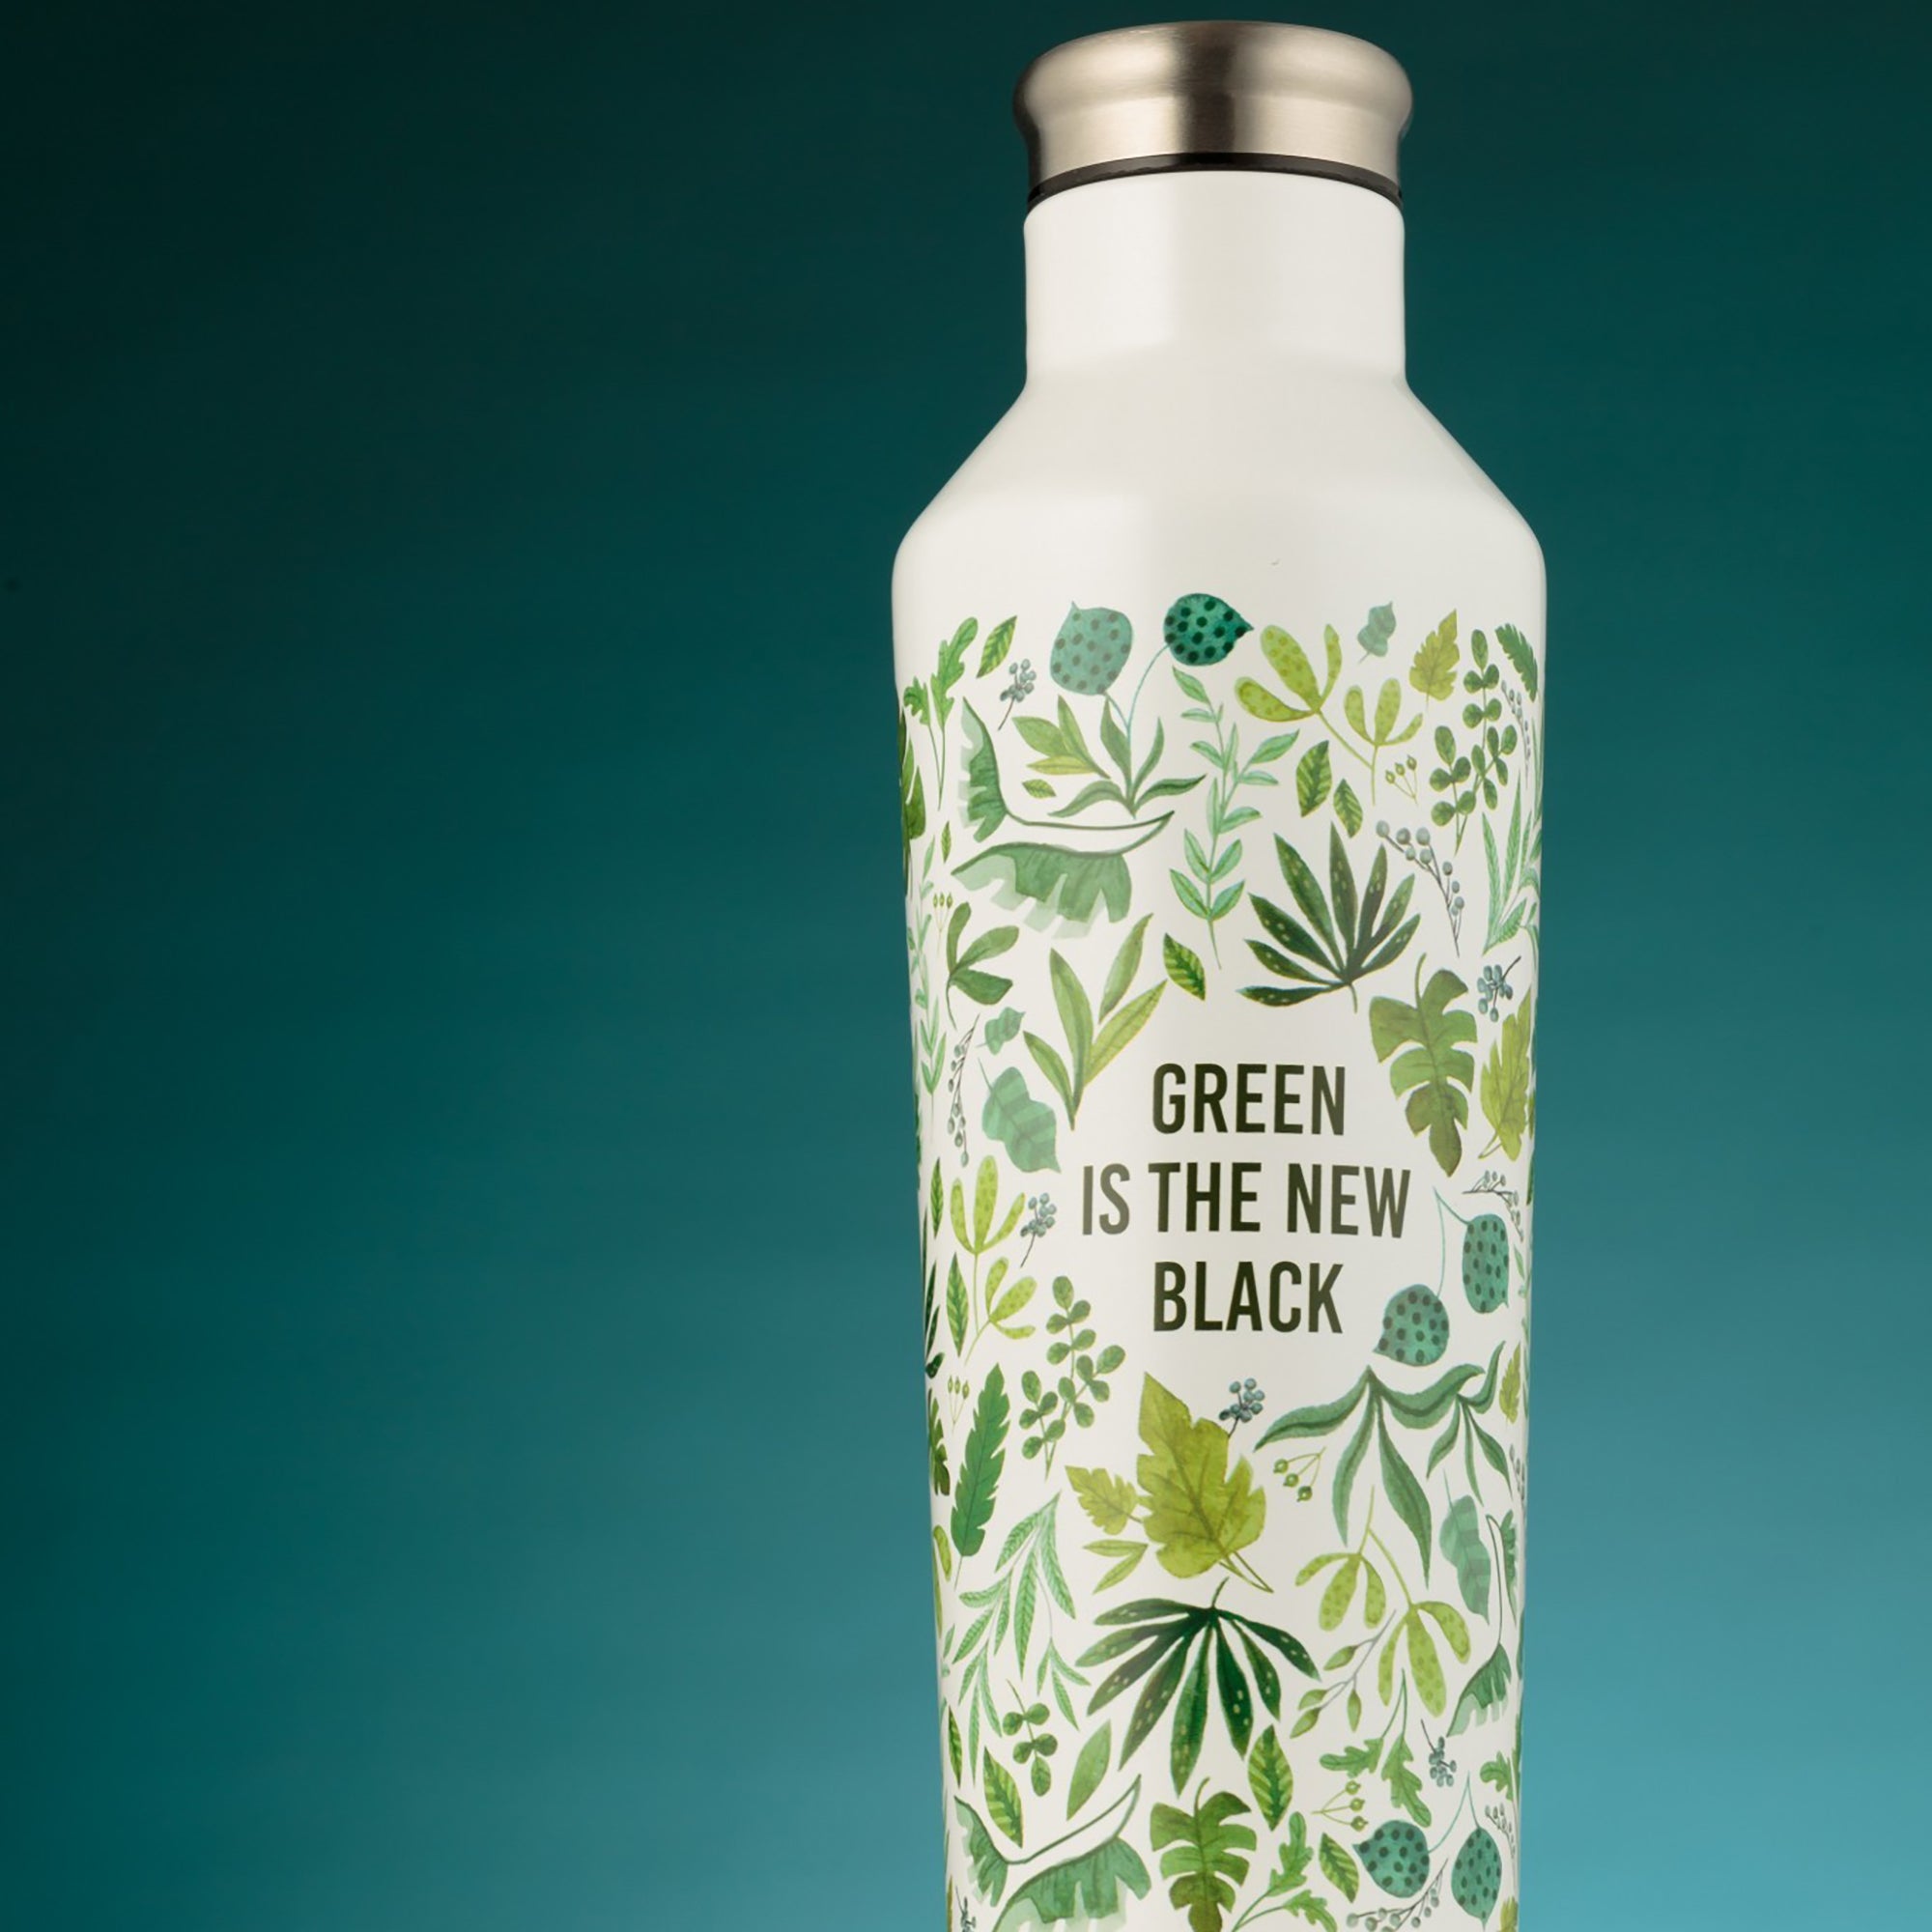 Bouteille isotherme à double paroi en inox 500ml - Green is the new black